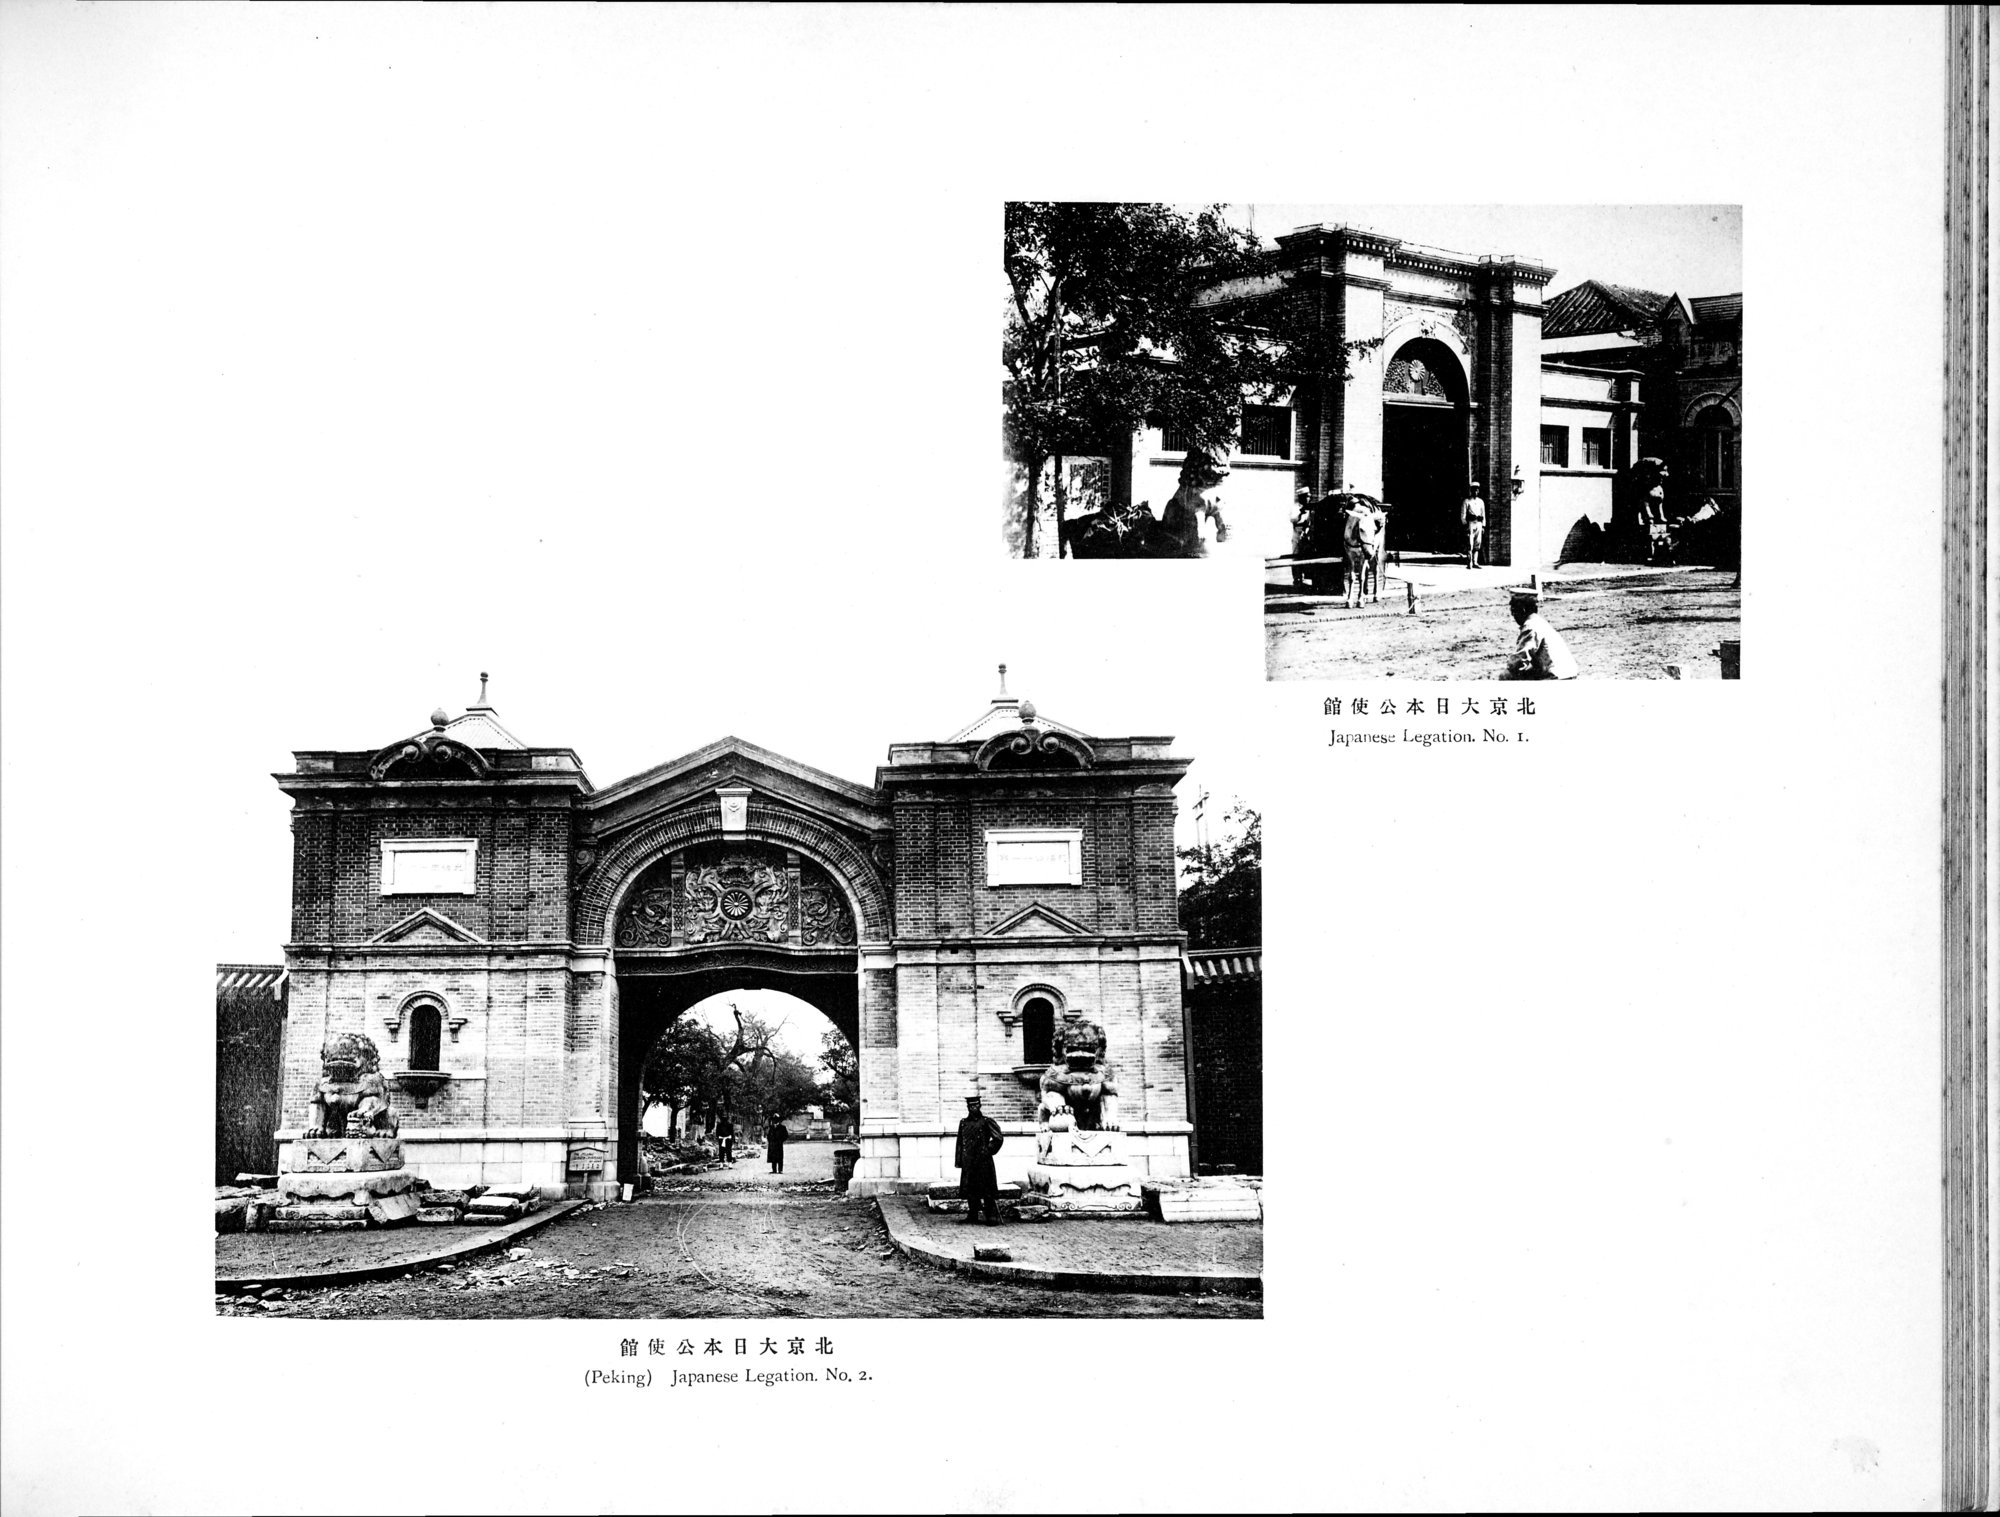 Views and Custom of North China : vol.1 / Page 131 (Grayscale High Resolution Image)